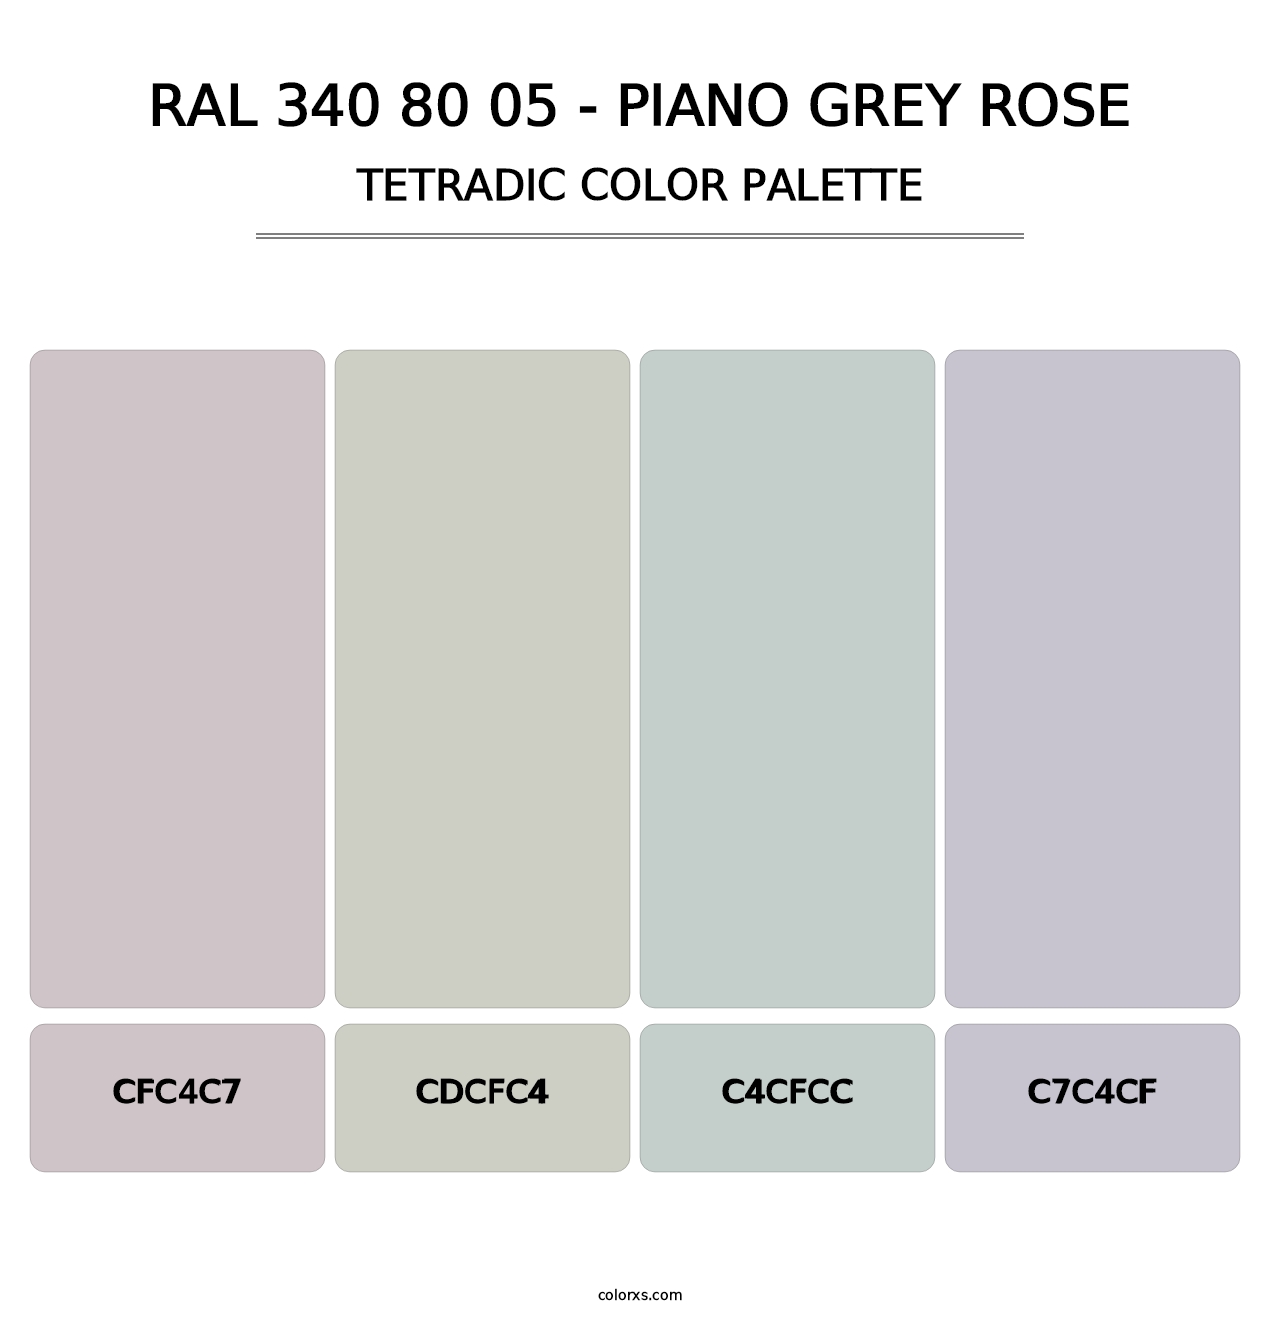 RAL 340 80 05 - Piano Grey Rose - Tetradic Color Palette